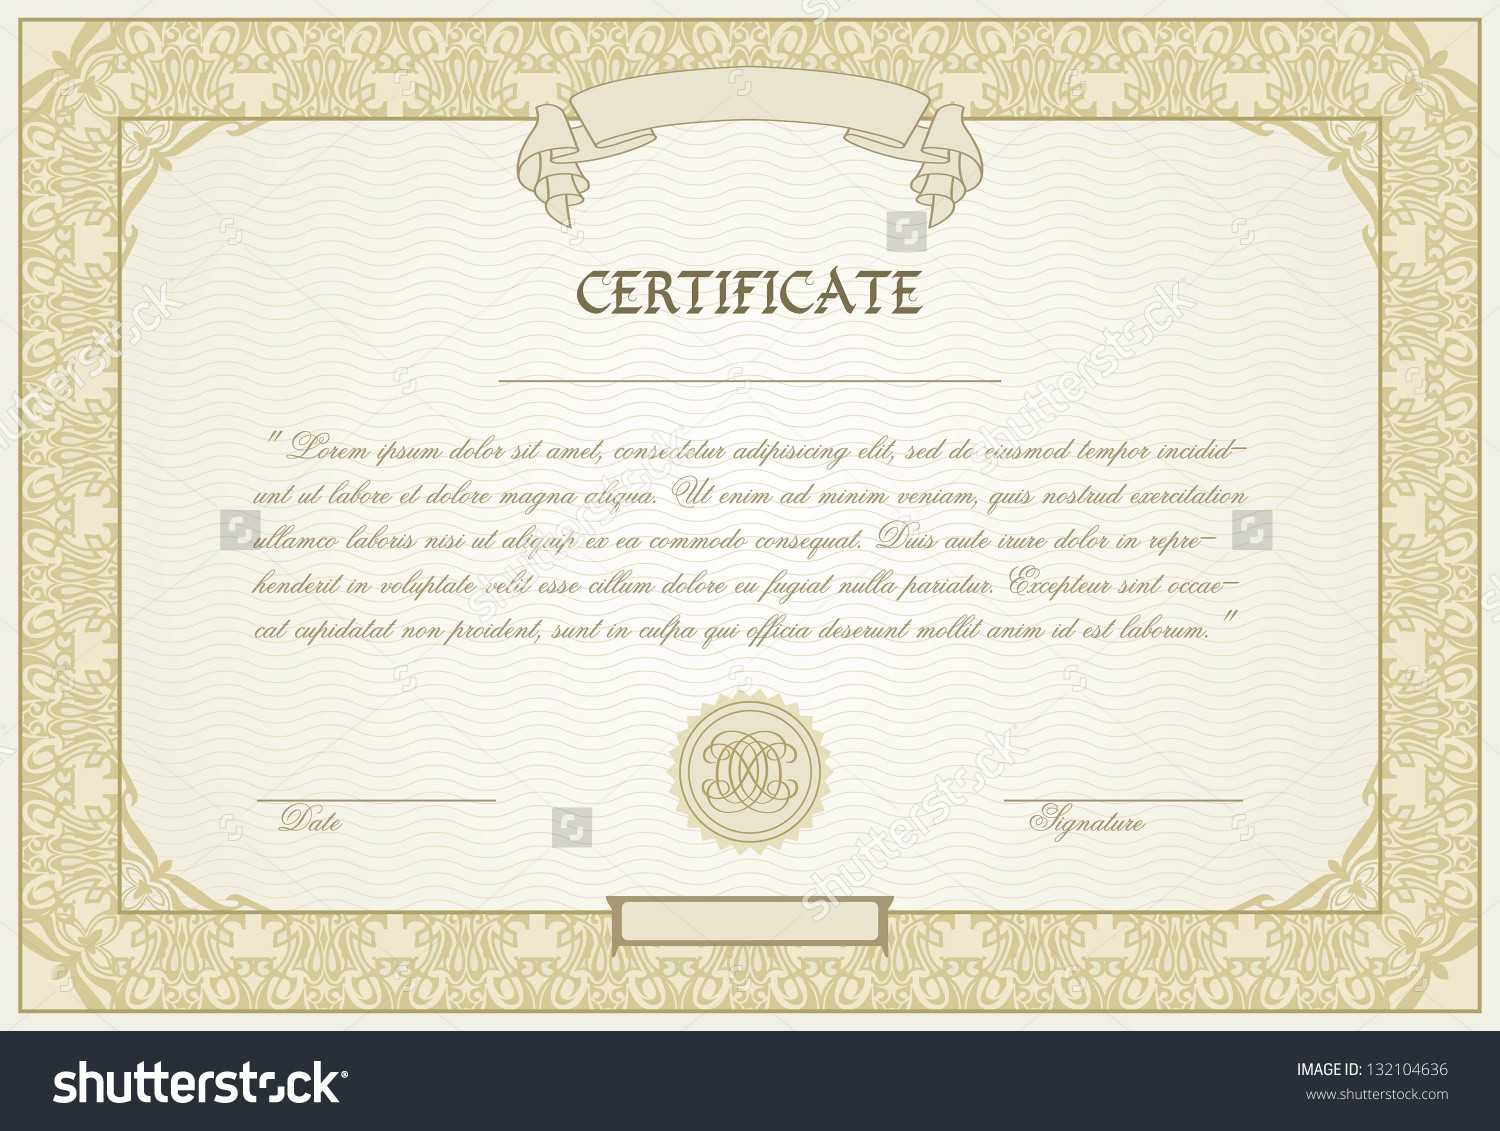 Brilliant Ideas Of Sample Award Certificate Wording For Your Inside Long Service Certificate Template Sample